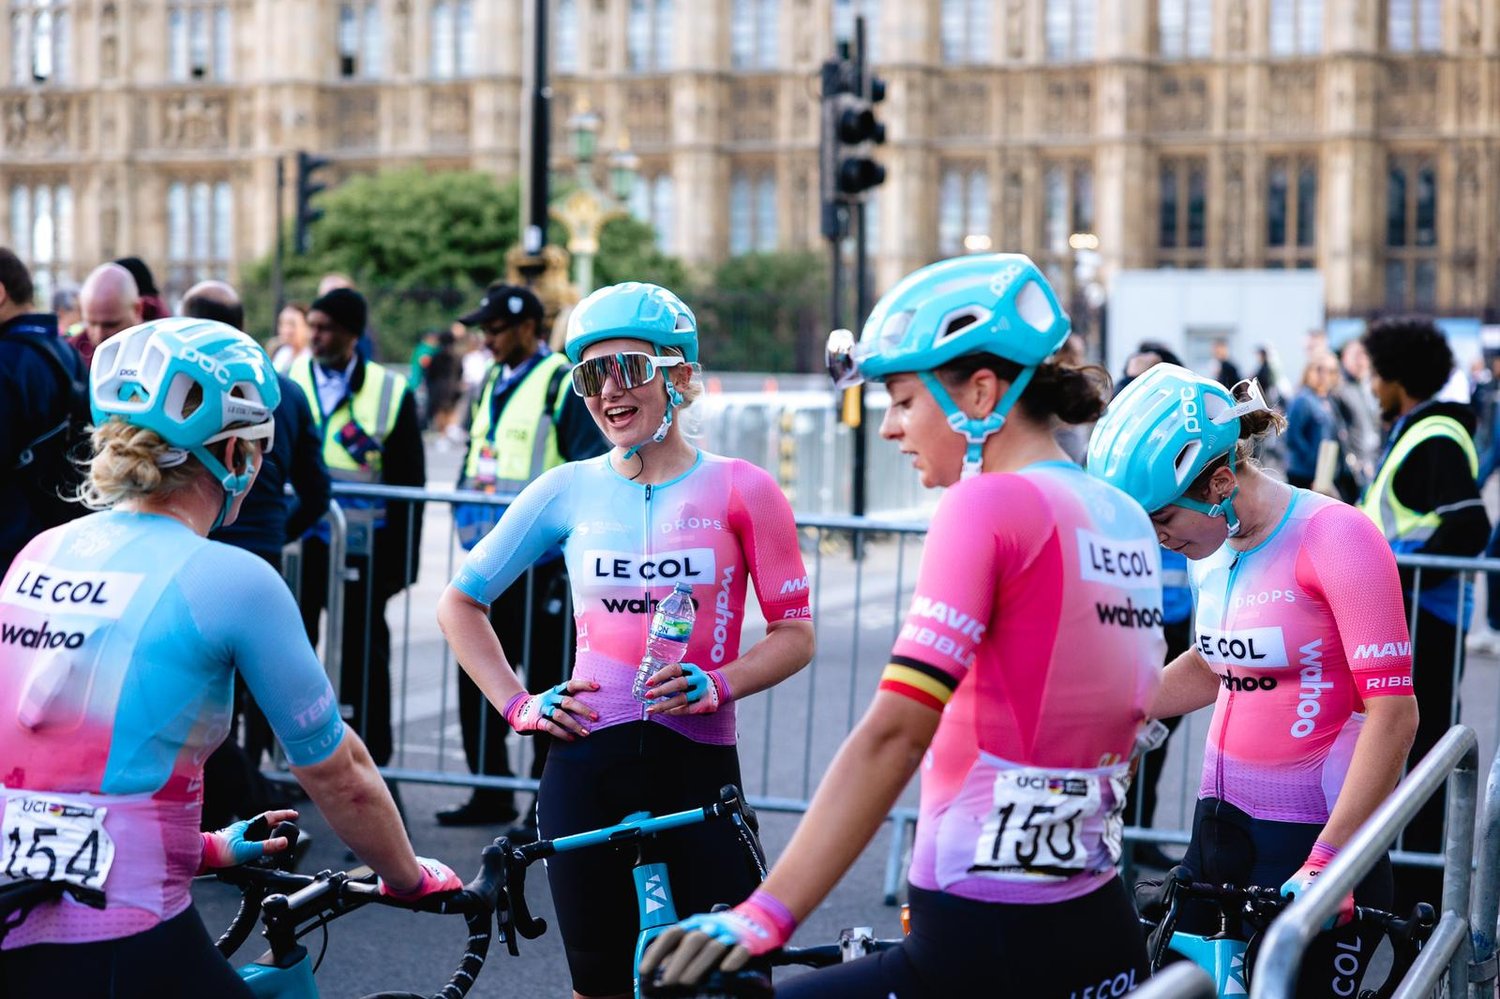 Maike and Jesse sprint to top 10 finishes in RideLondon finale